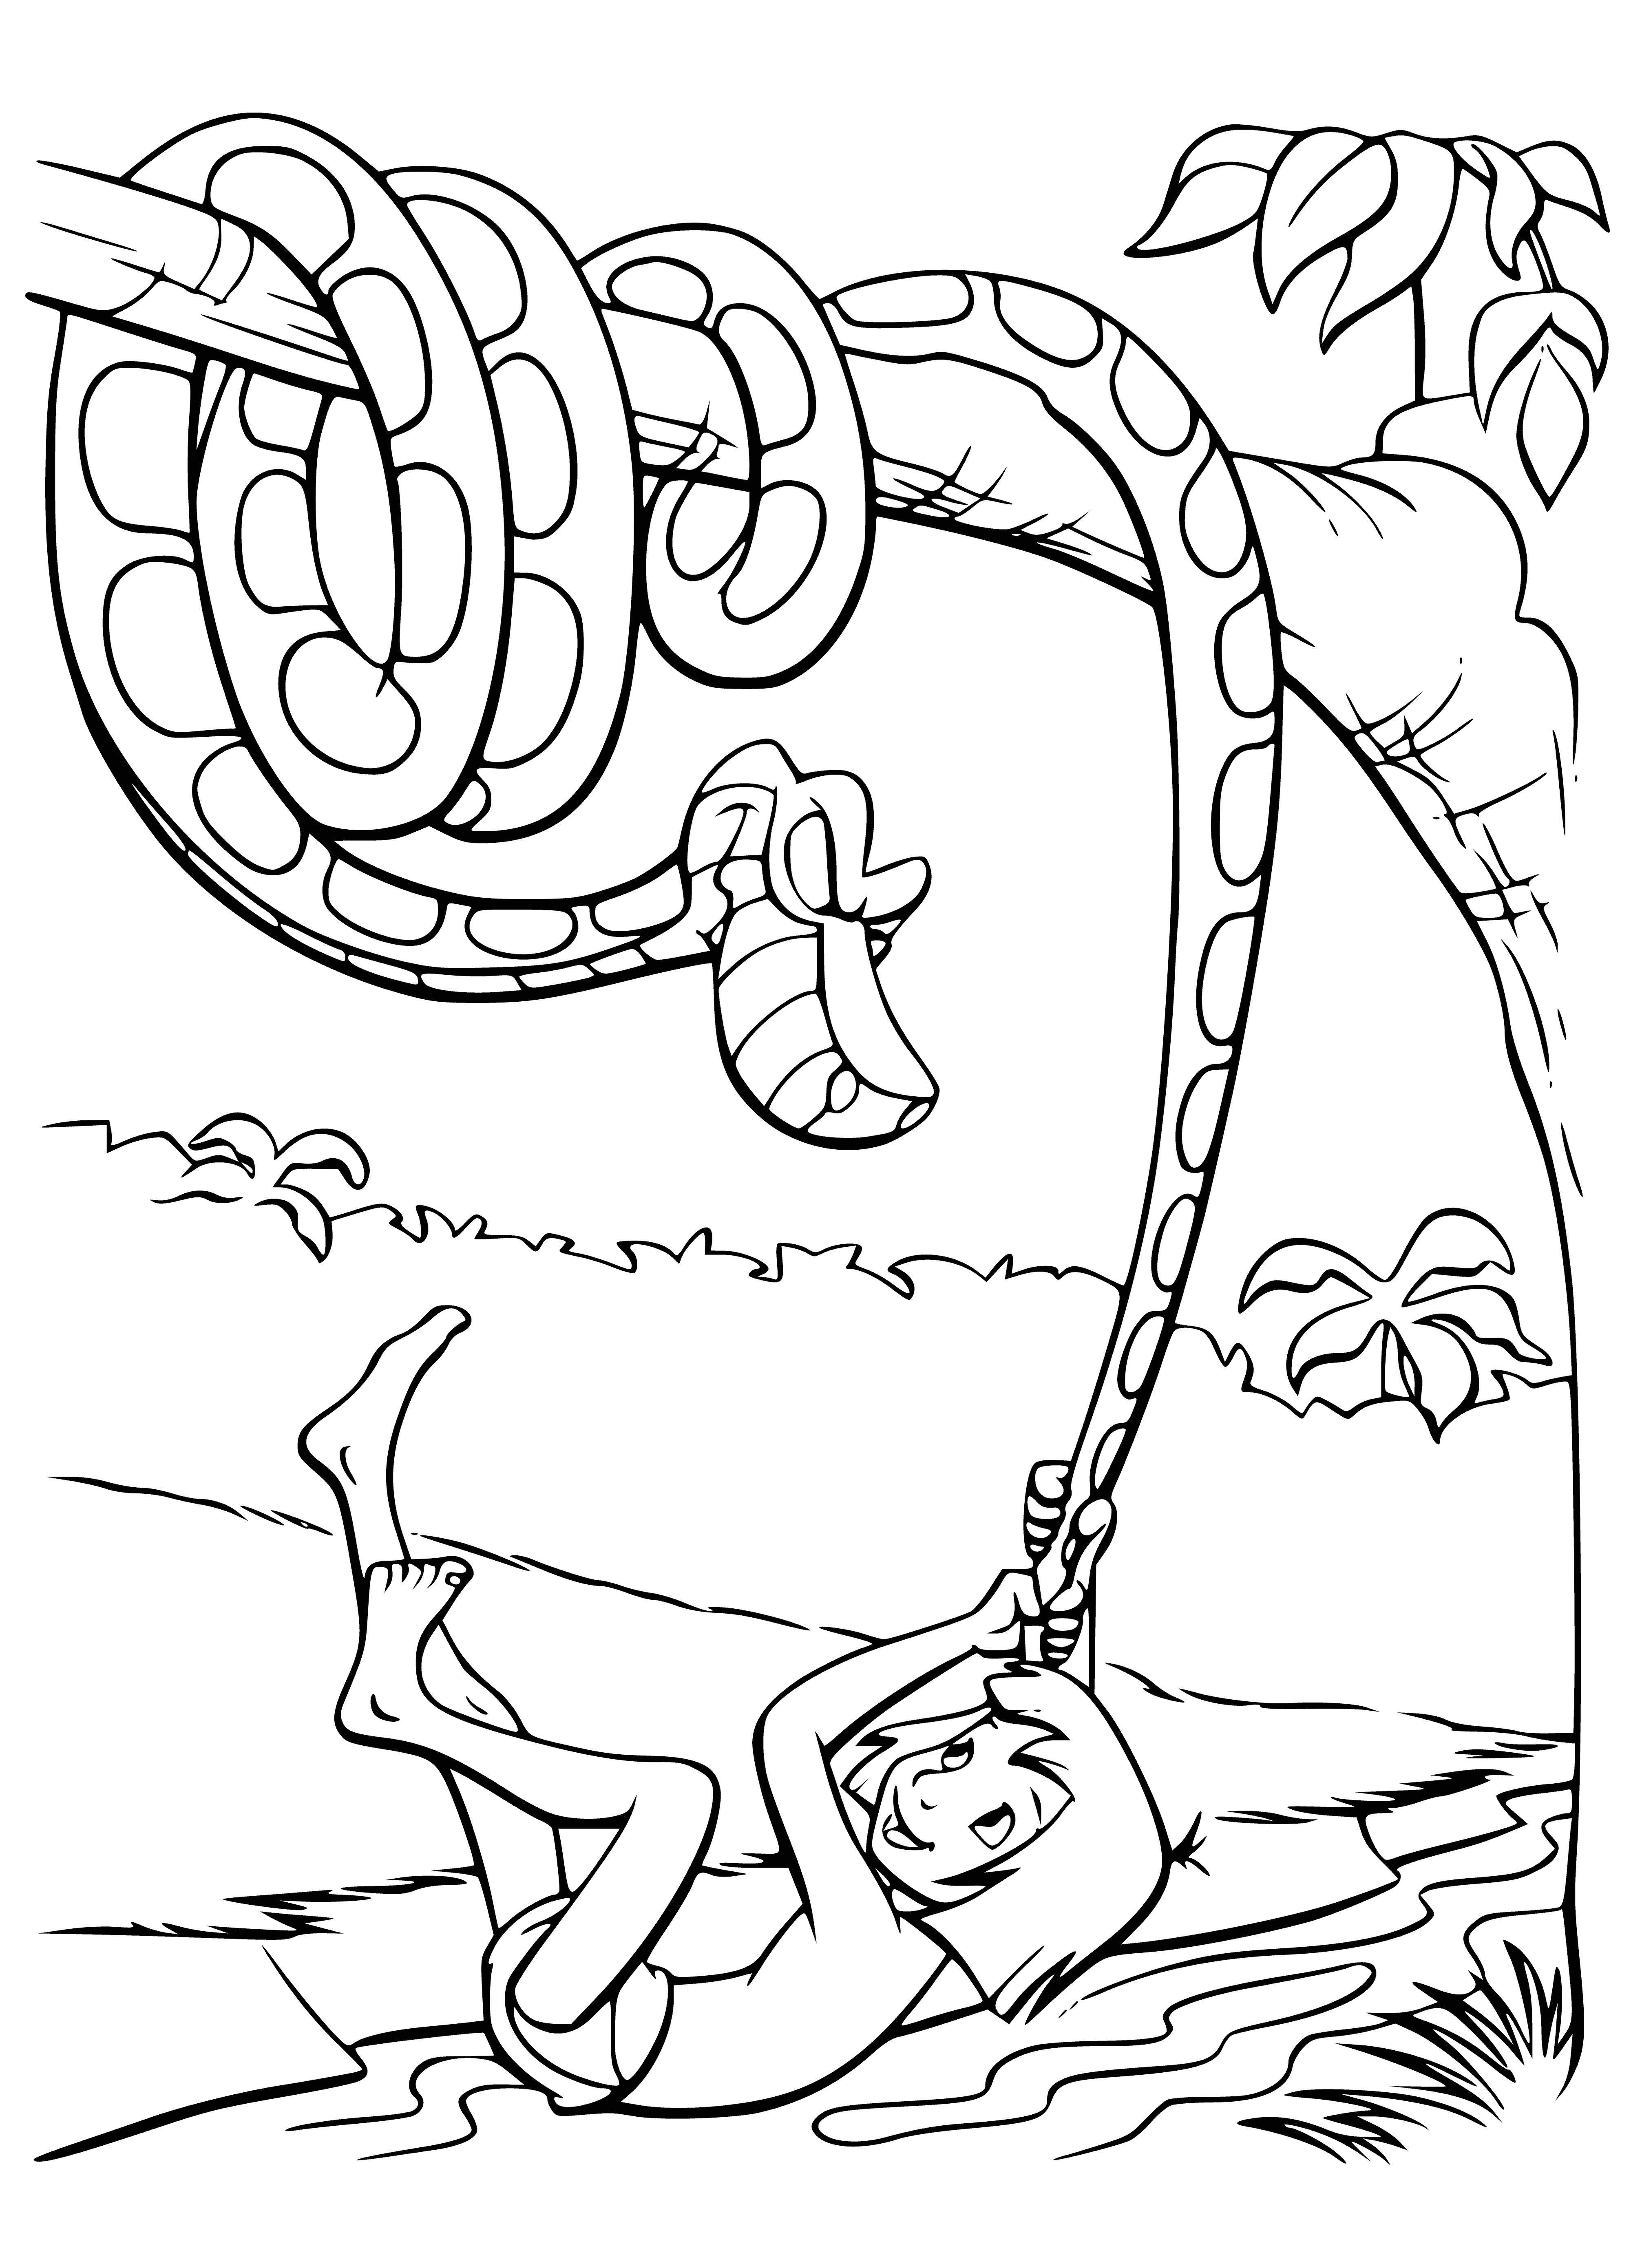 Kaa and Mowgli coloring page